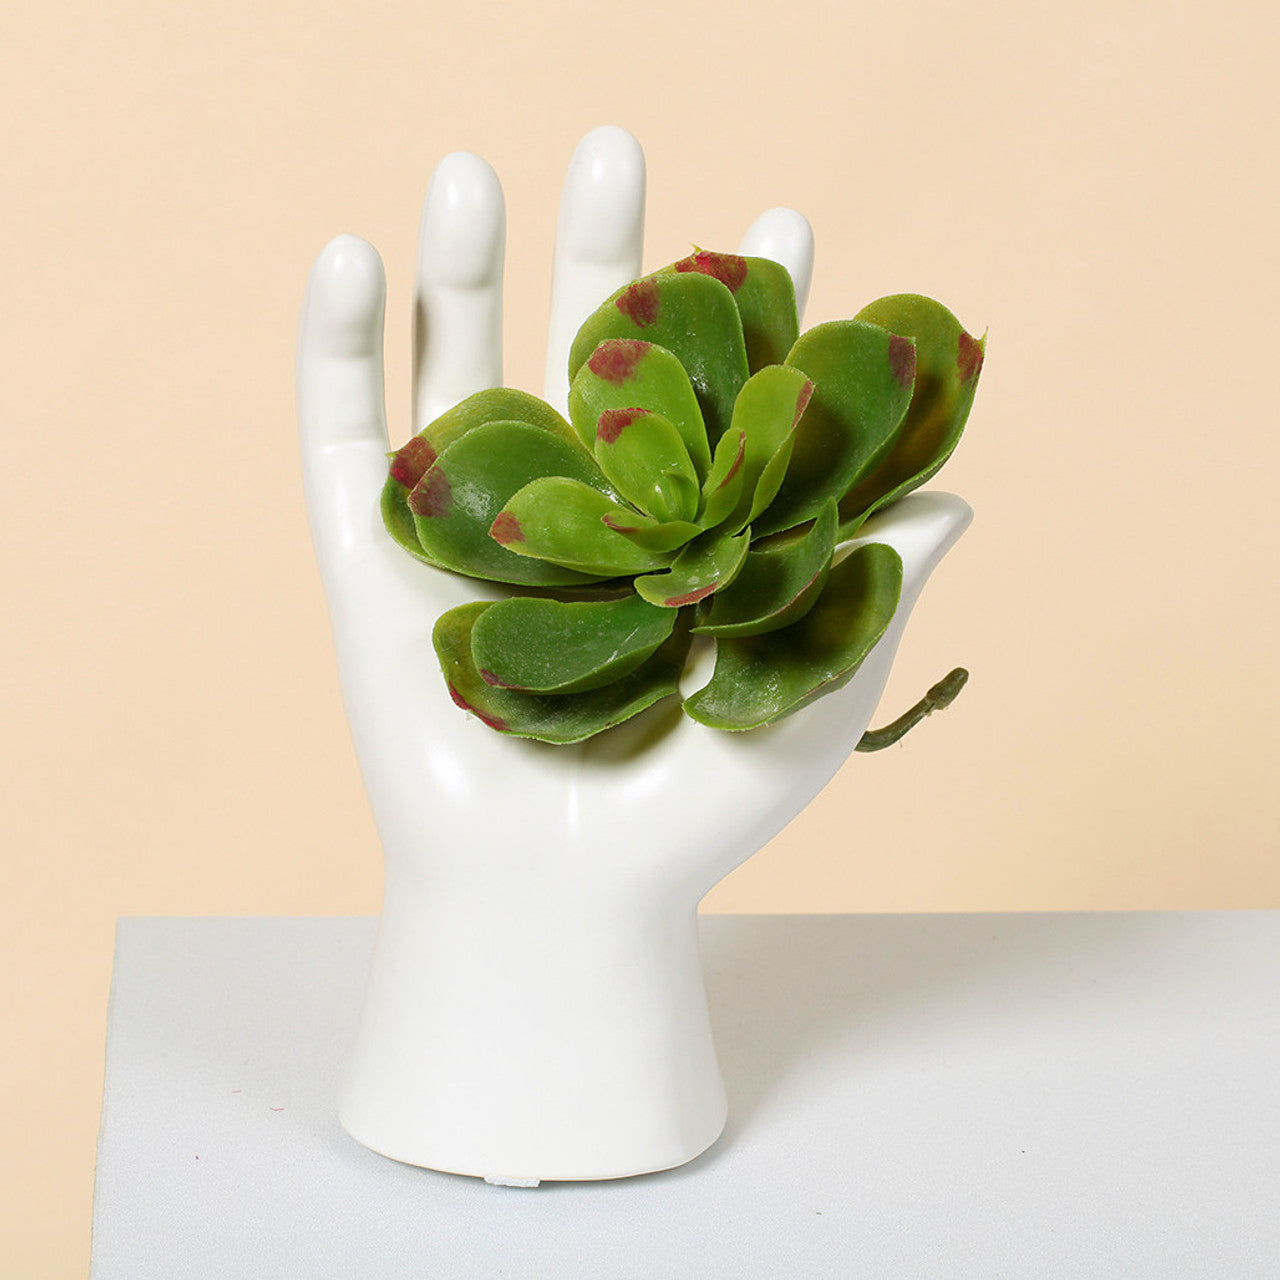 Relaxed Hand Ceramic Decor